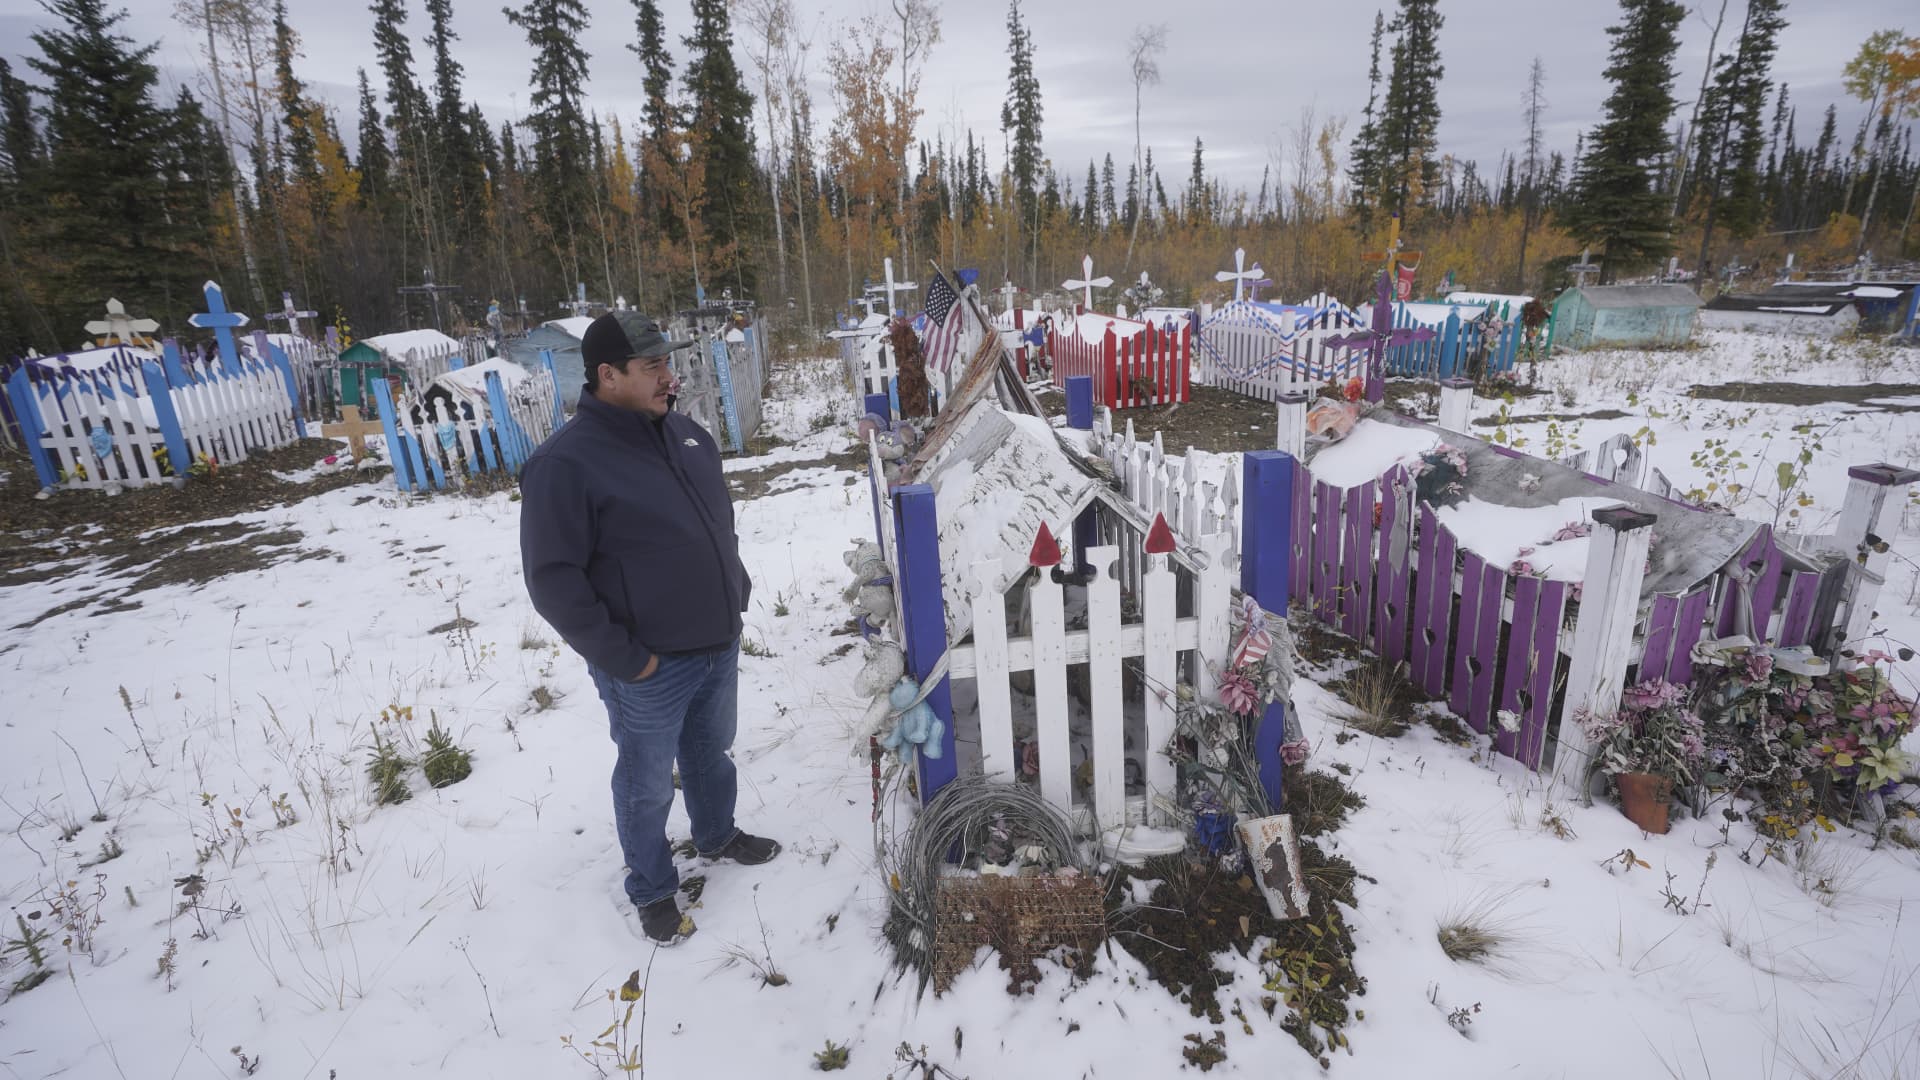 Herbie Demit, Tanacross Village Council president, walks through a cemetery Thursday, Sept. 23, 2021, in Tanacross, Alaska. Alaska is experiencing one of the sharpest rises in COVID-19 cases in the country, coupled with a limited statewide healthcare system that is almost entirely reliant on Anchorage hospitals.